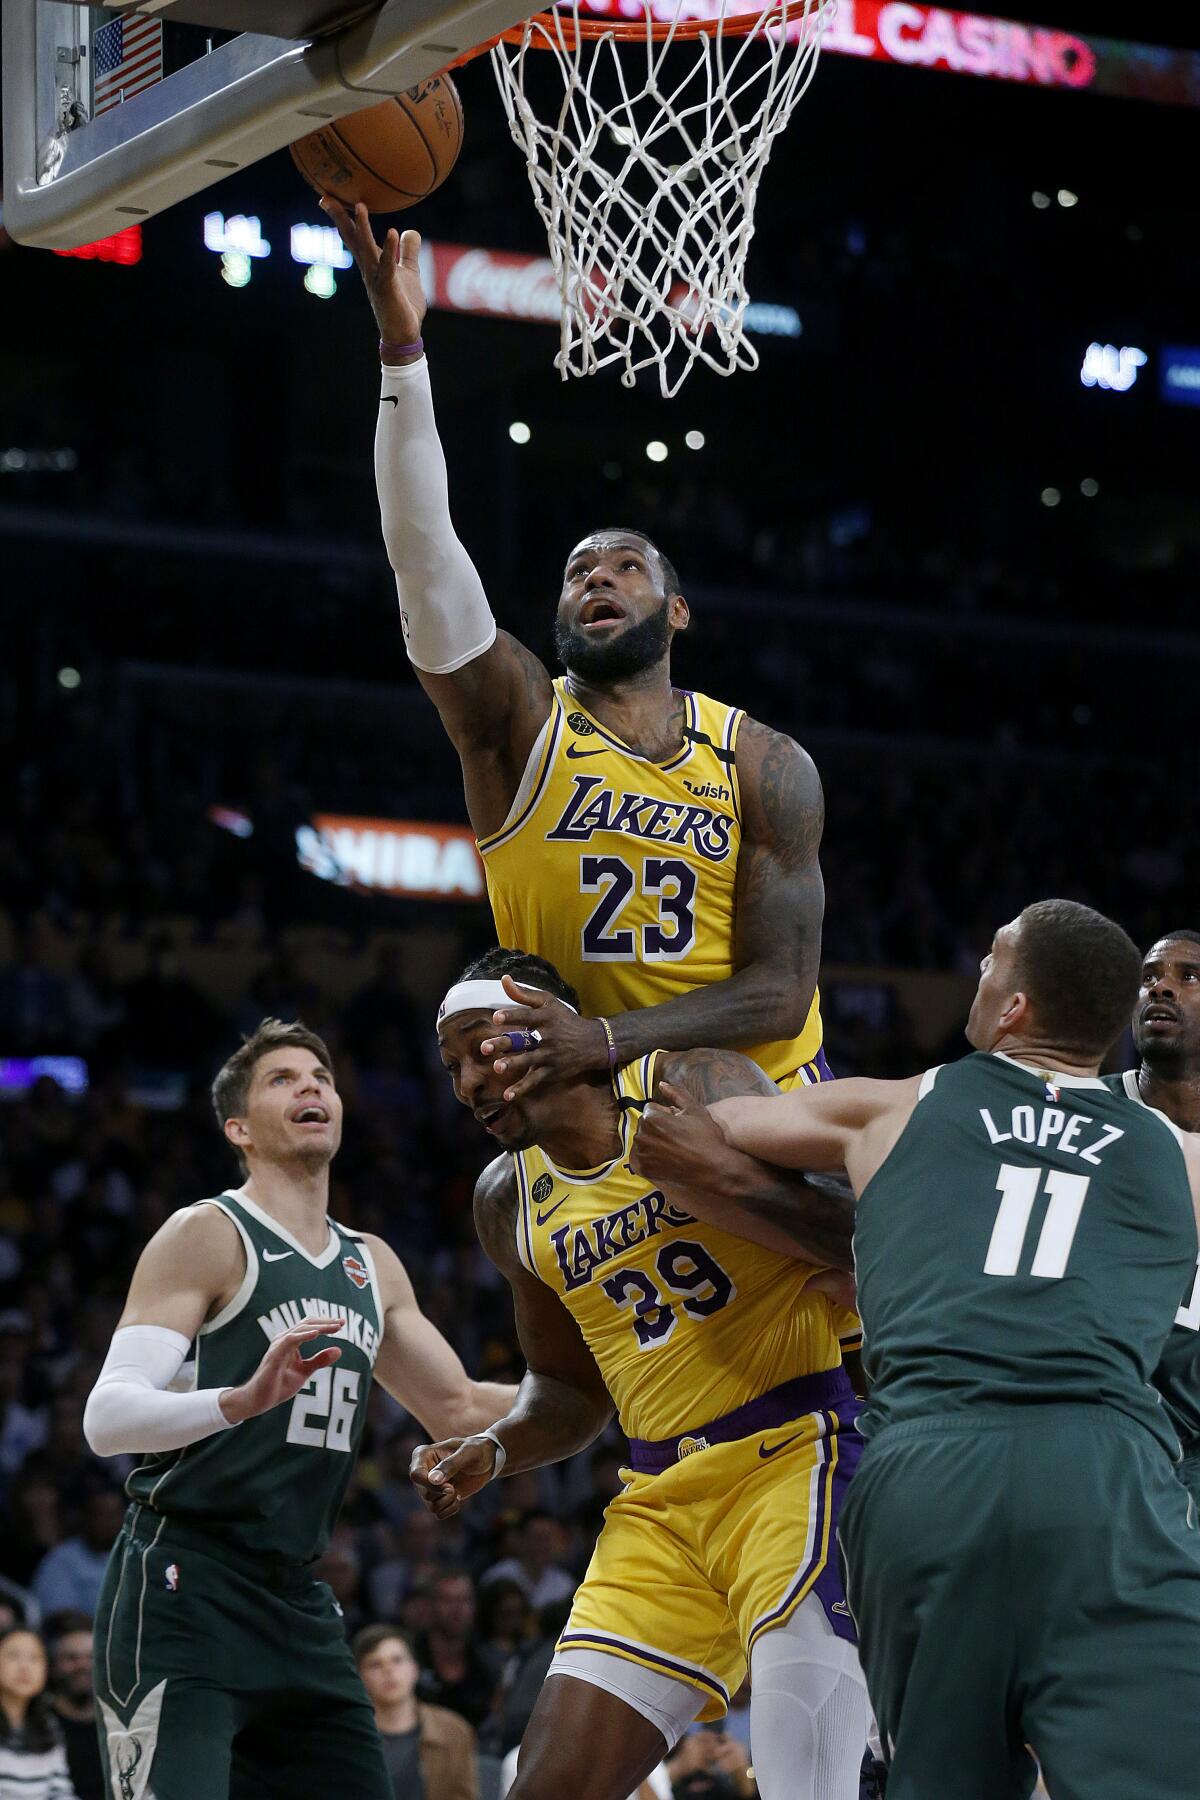 LeBron James scores a basket from Dwight Howard's back during the second half of the Lakers' victory over the Bucks on March 6 at Staples Center.